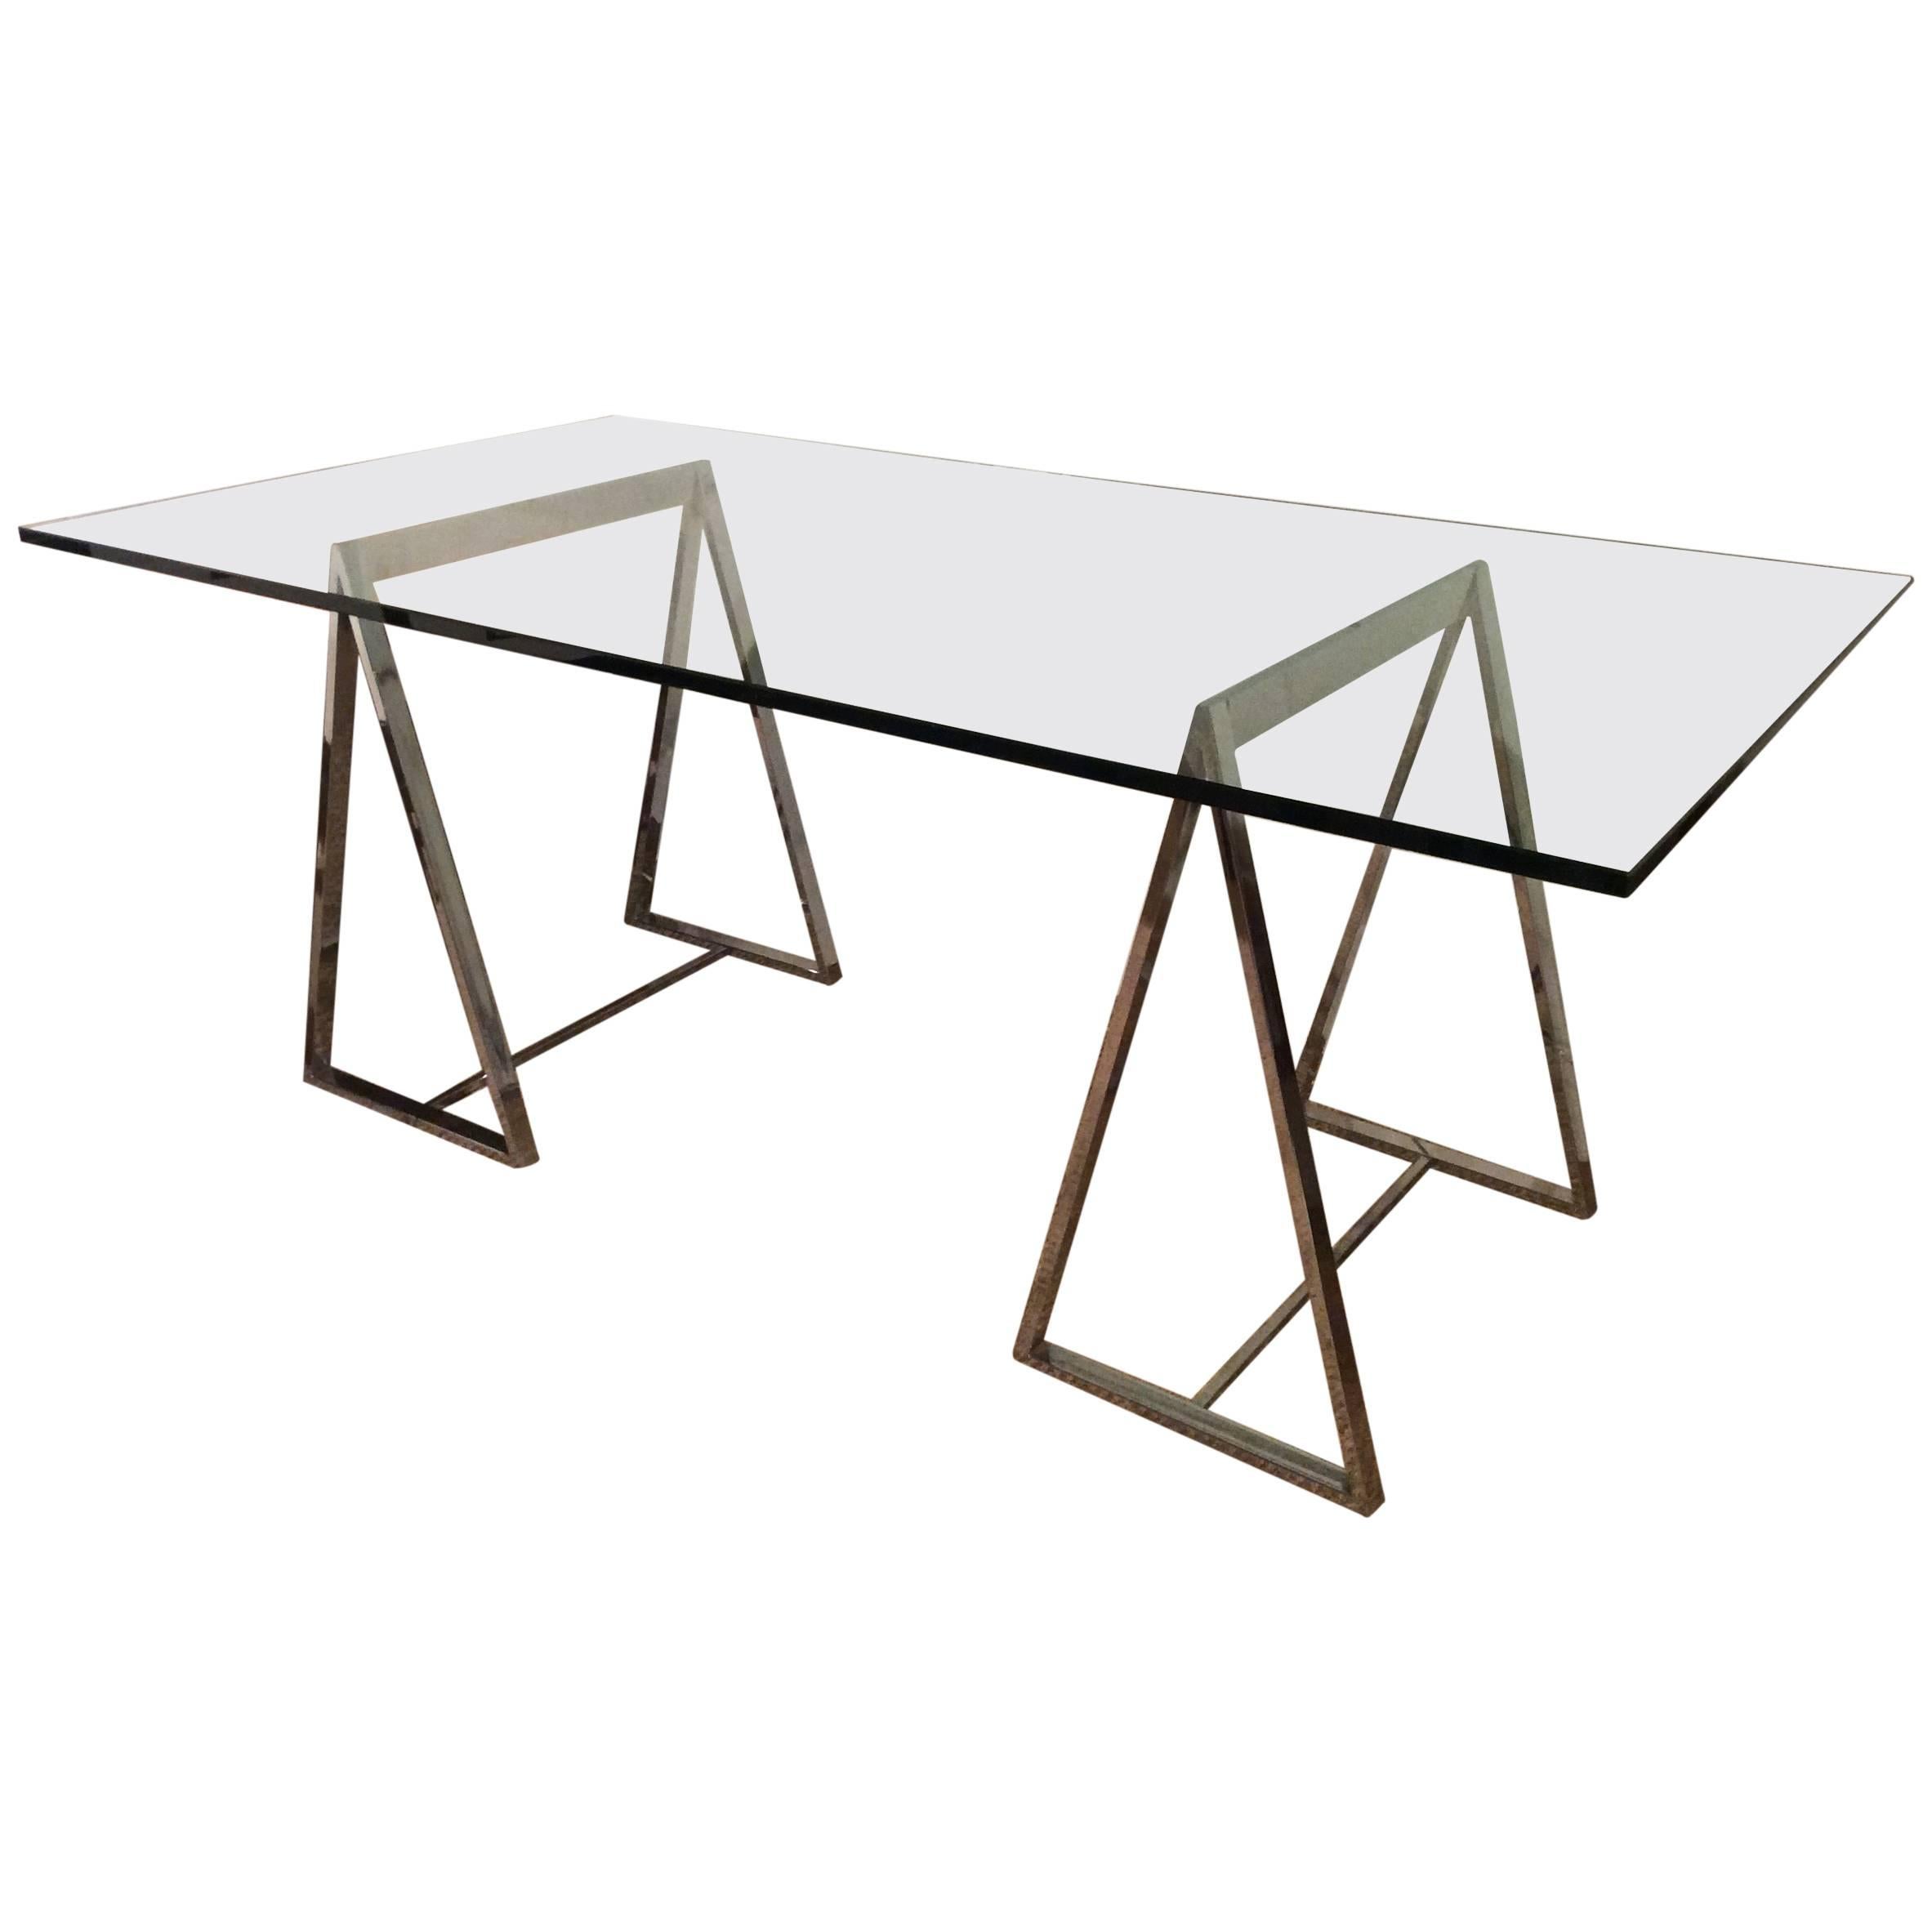 Polished Chrome Saw Horse Table or Desk